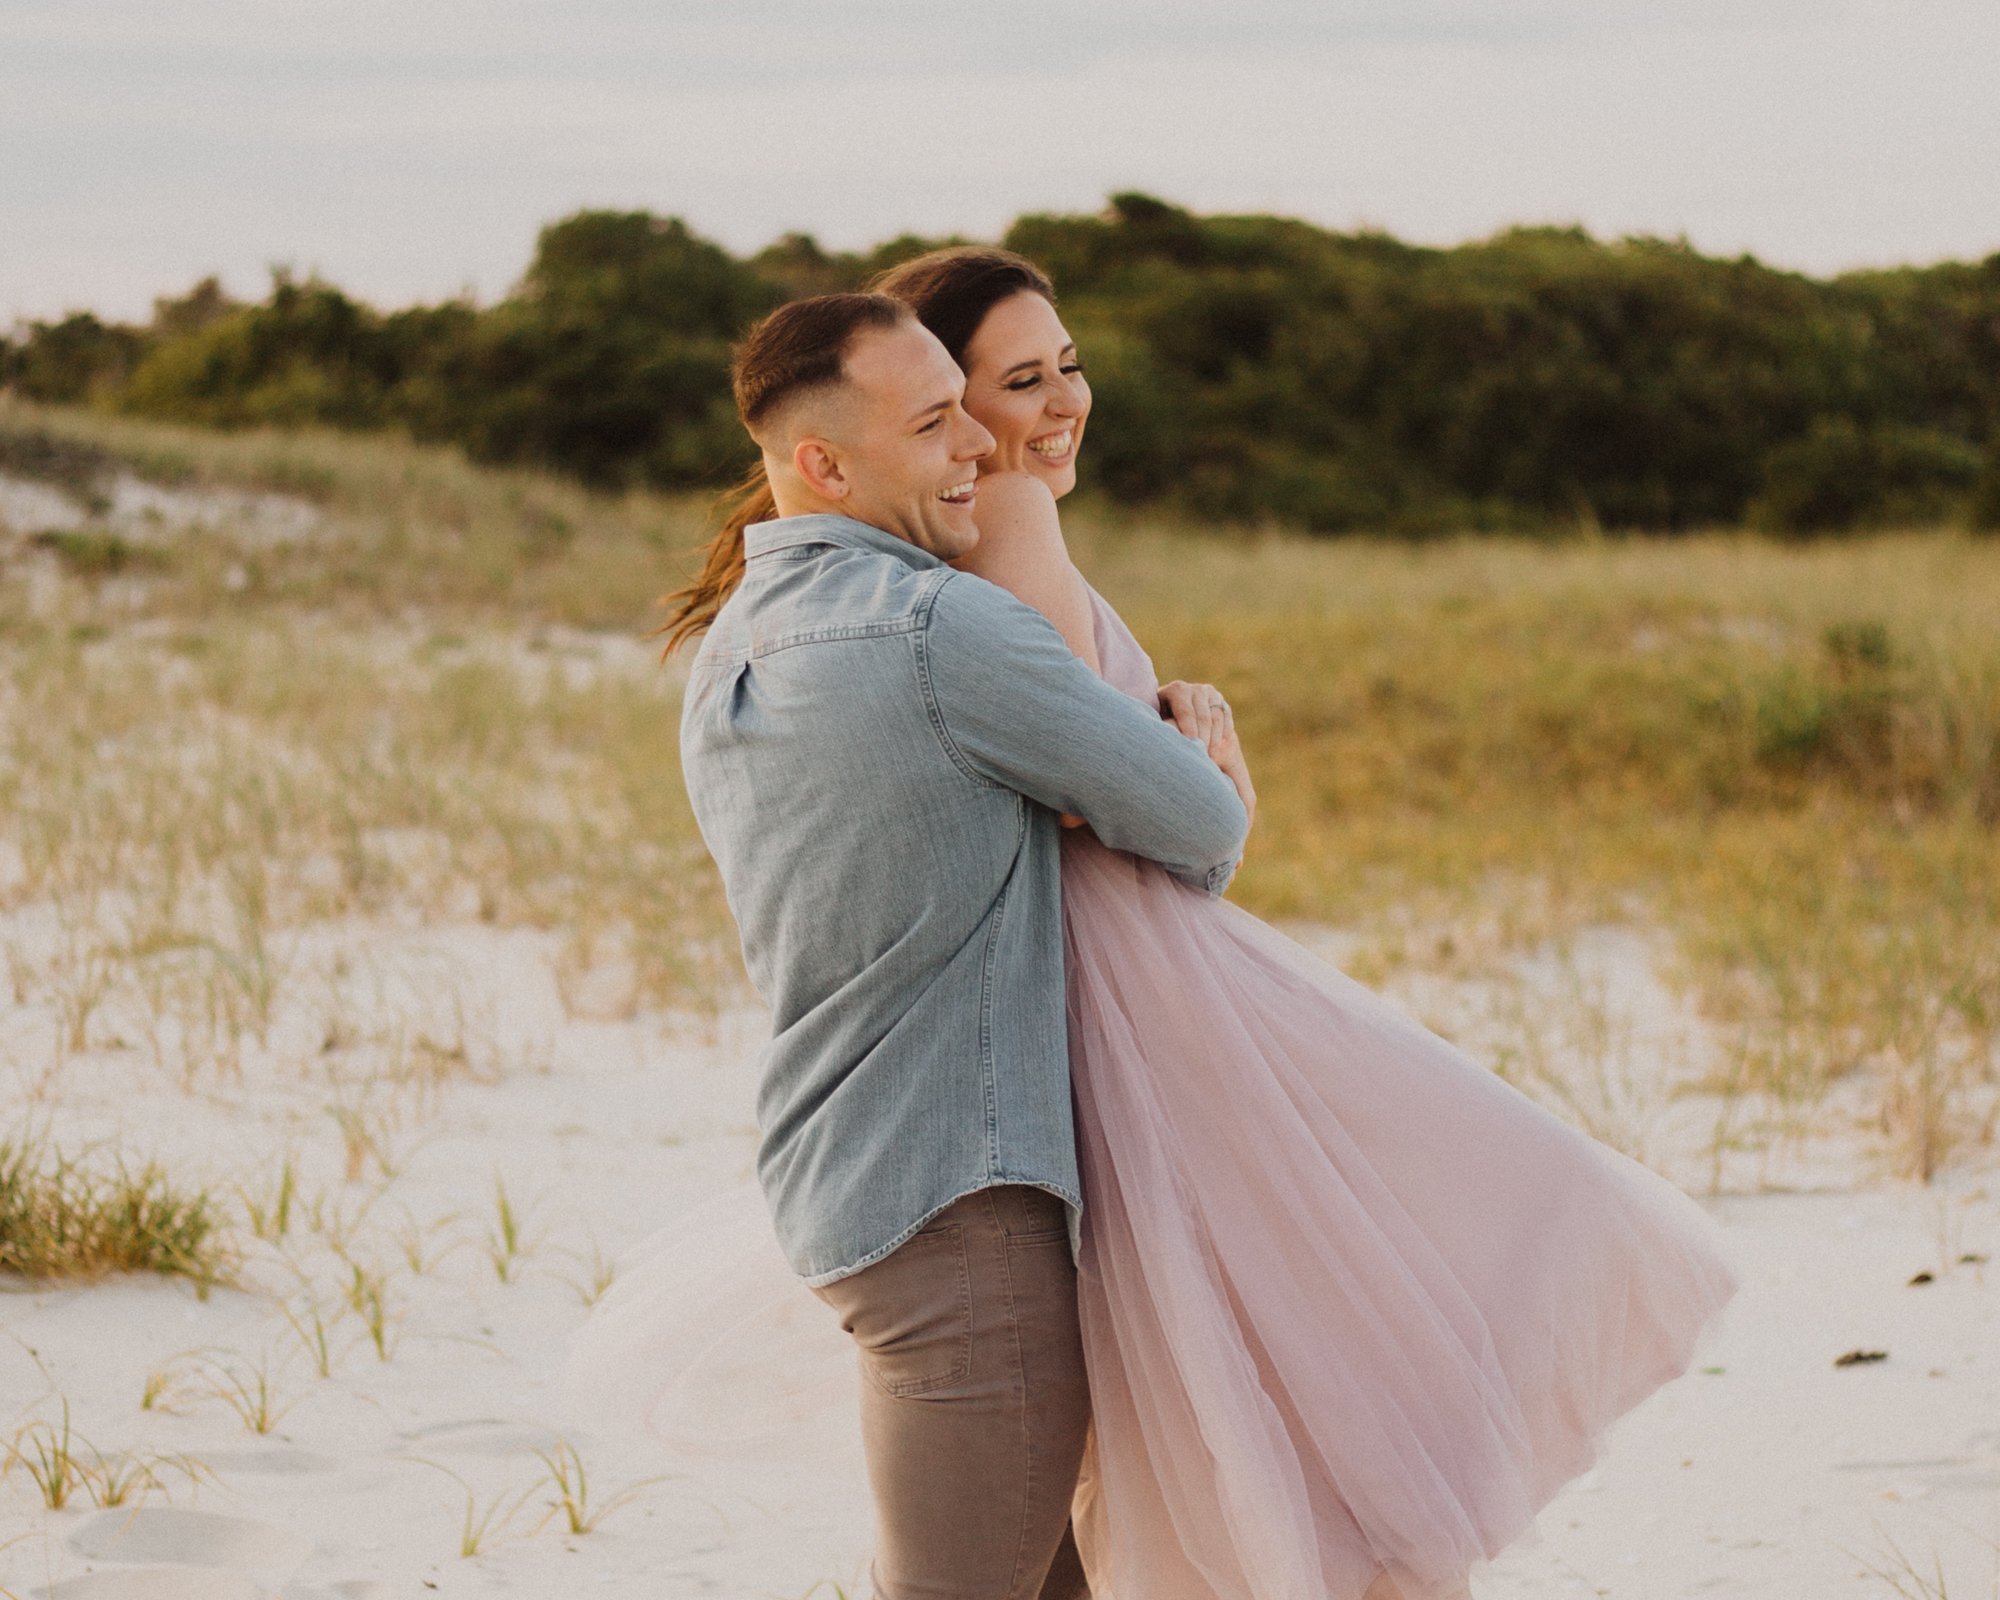 Smiling man in blue shirt holding and lifting his bride from behind as she laughs. In grassy sand dunes.